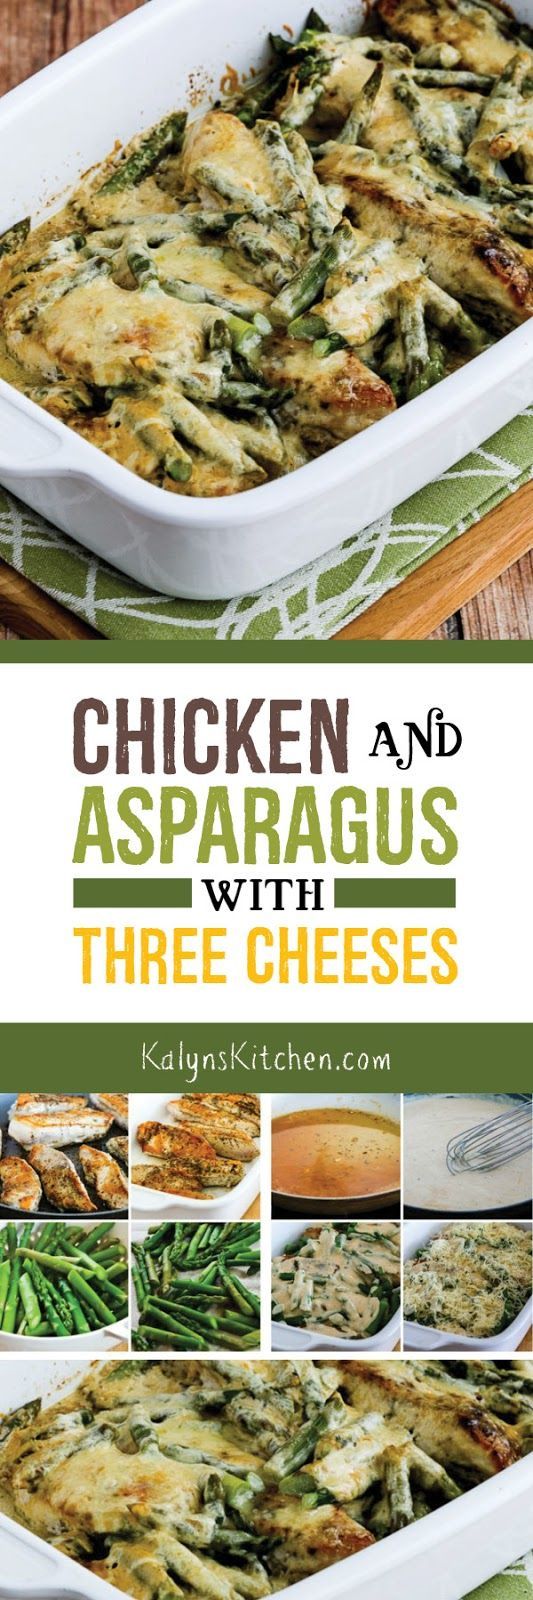 Chicken and Asparagus with Three Cheeses found on KalynsKitchen.com